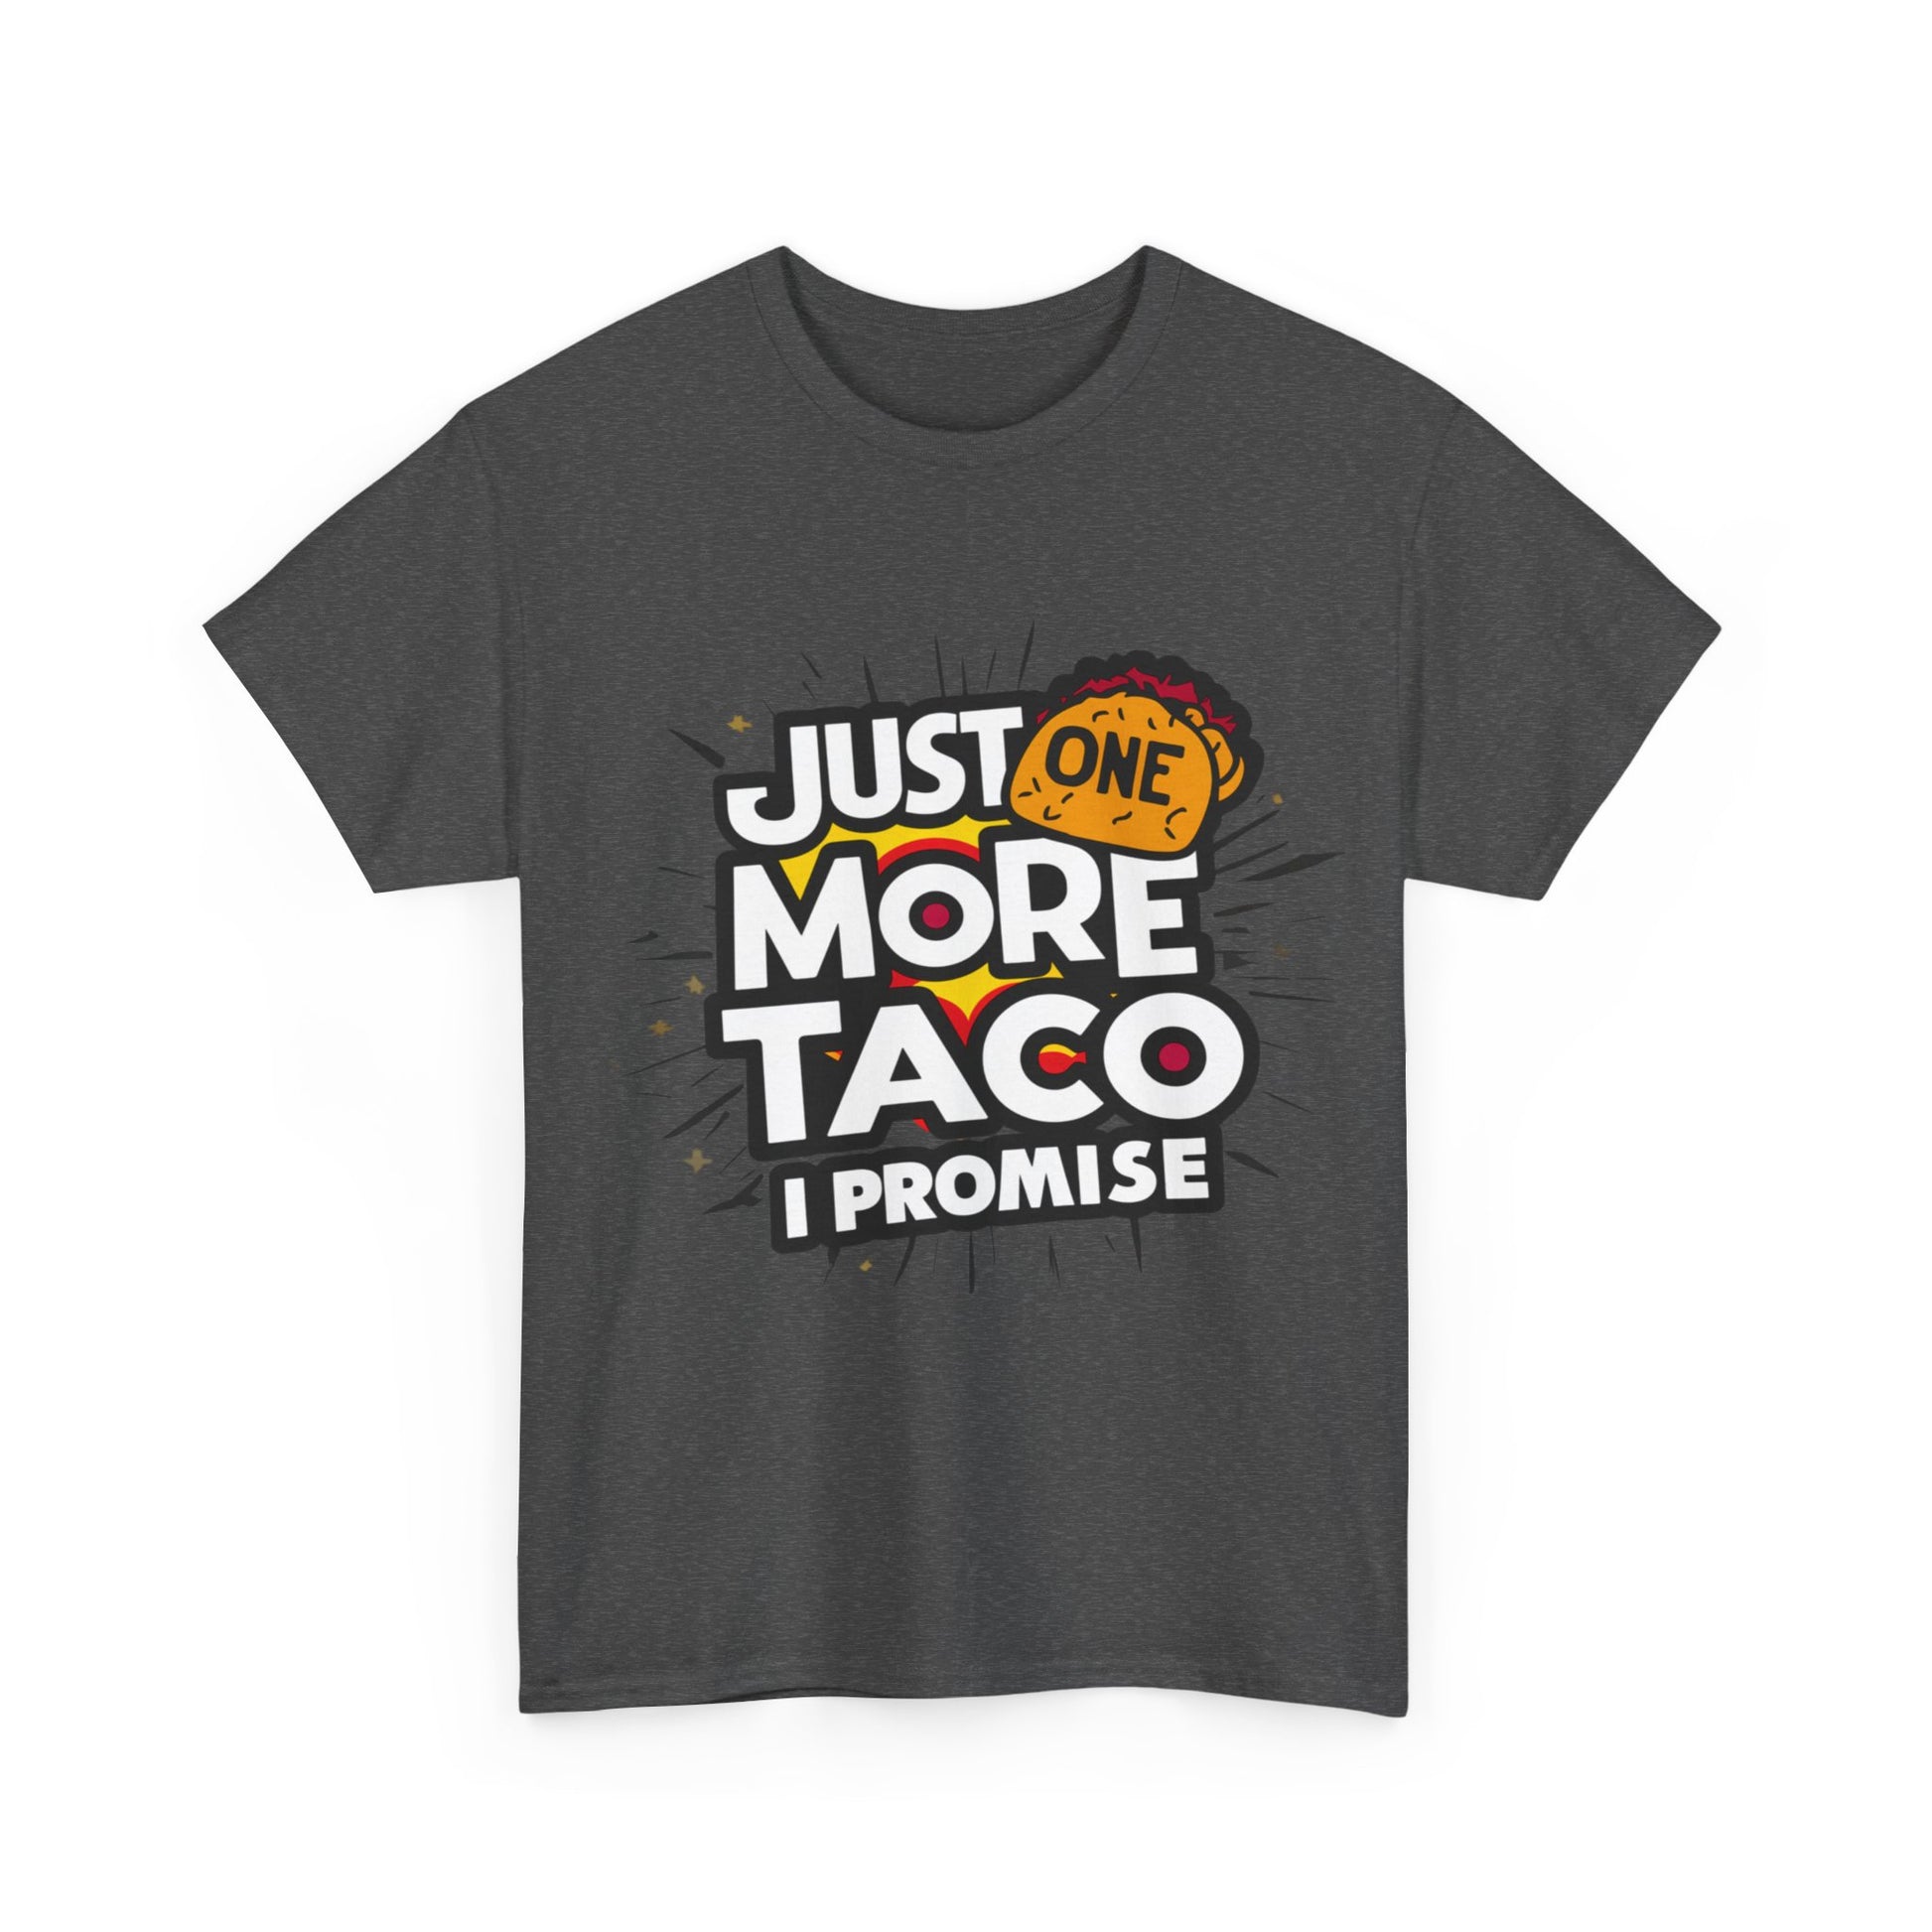 Copy of Just One More Taco I Promise Mexican Food Graphic Unisex Heavy Cotton Tee Cotton Funny Humorous Graphic Soft Premium Unisex Men Women Dark Heather T-shirt Birthday Gift-24